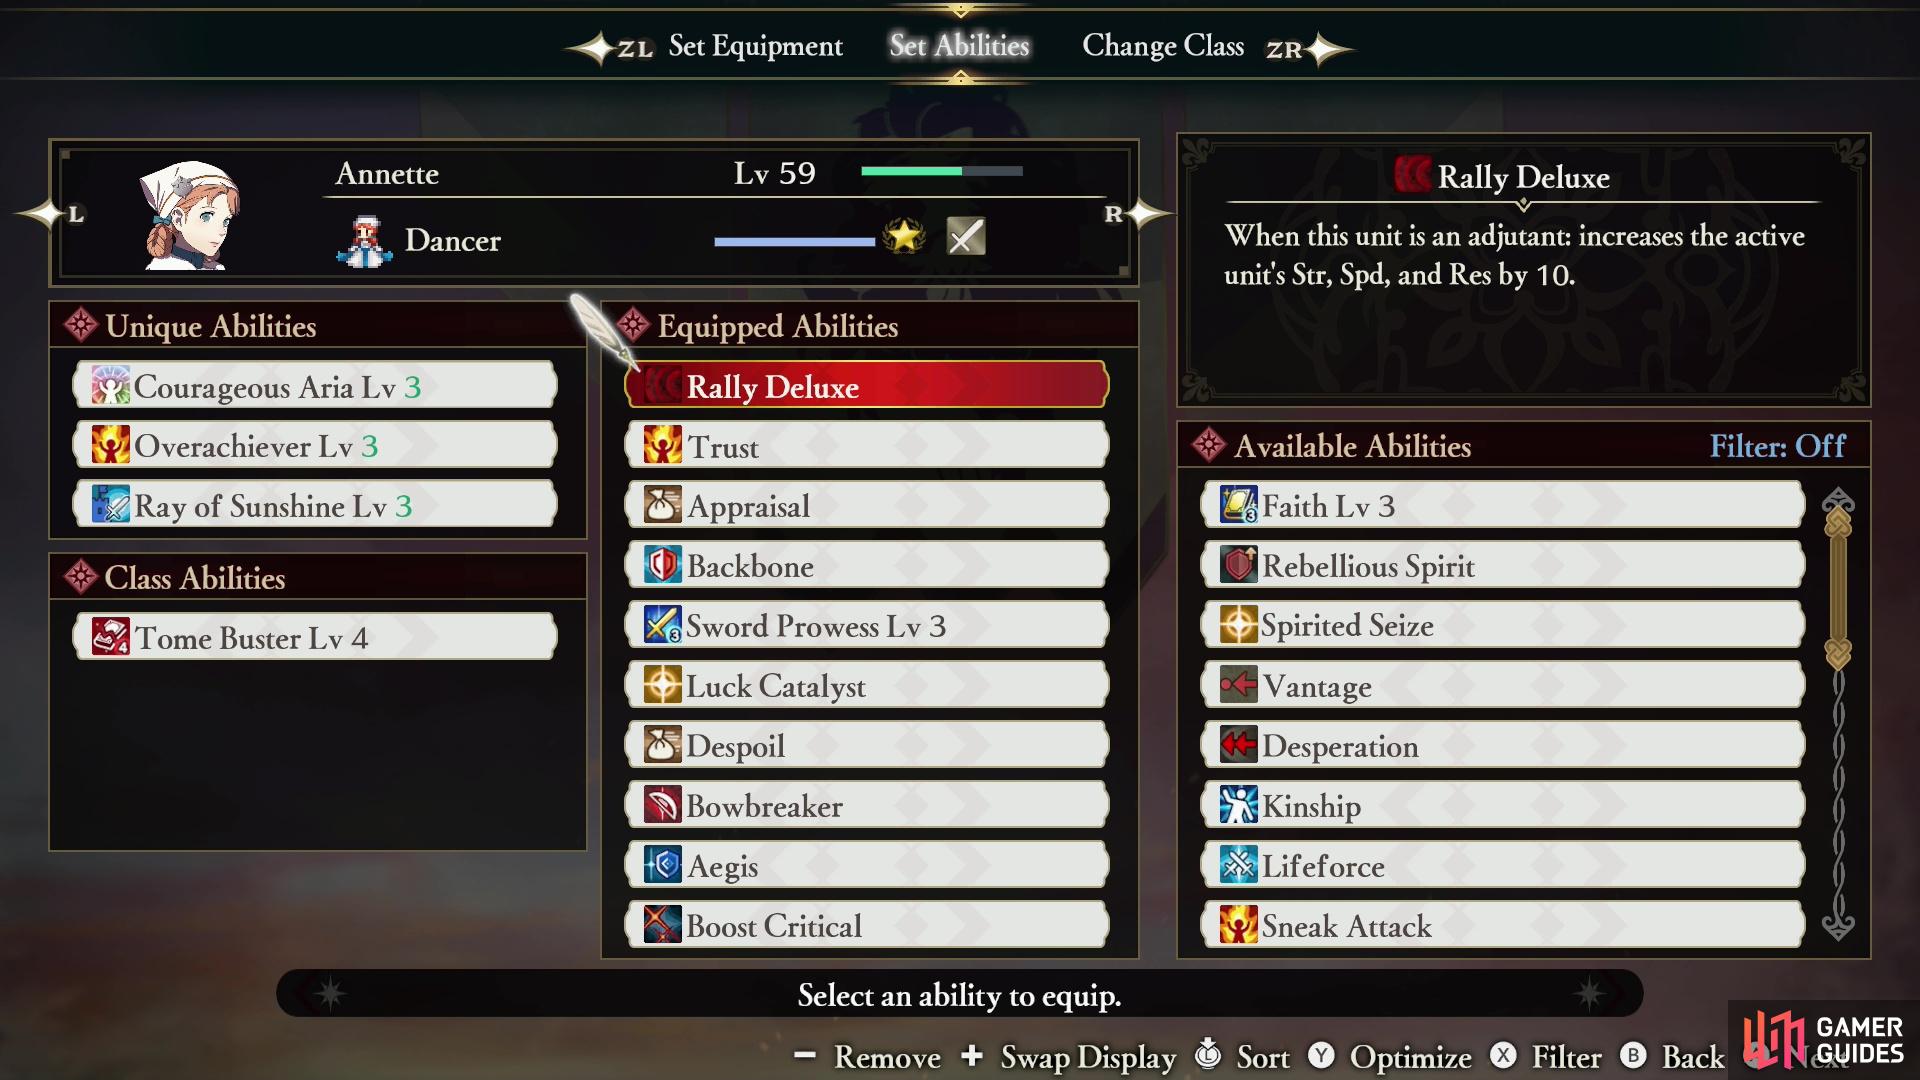 Certain Class Abilities - like the various Rally abilities certain characters have - will further boost stats granted by an Adjutant.